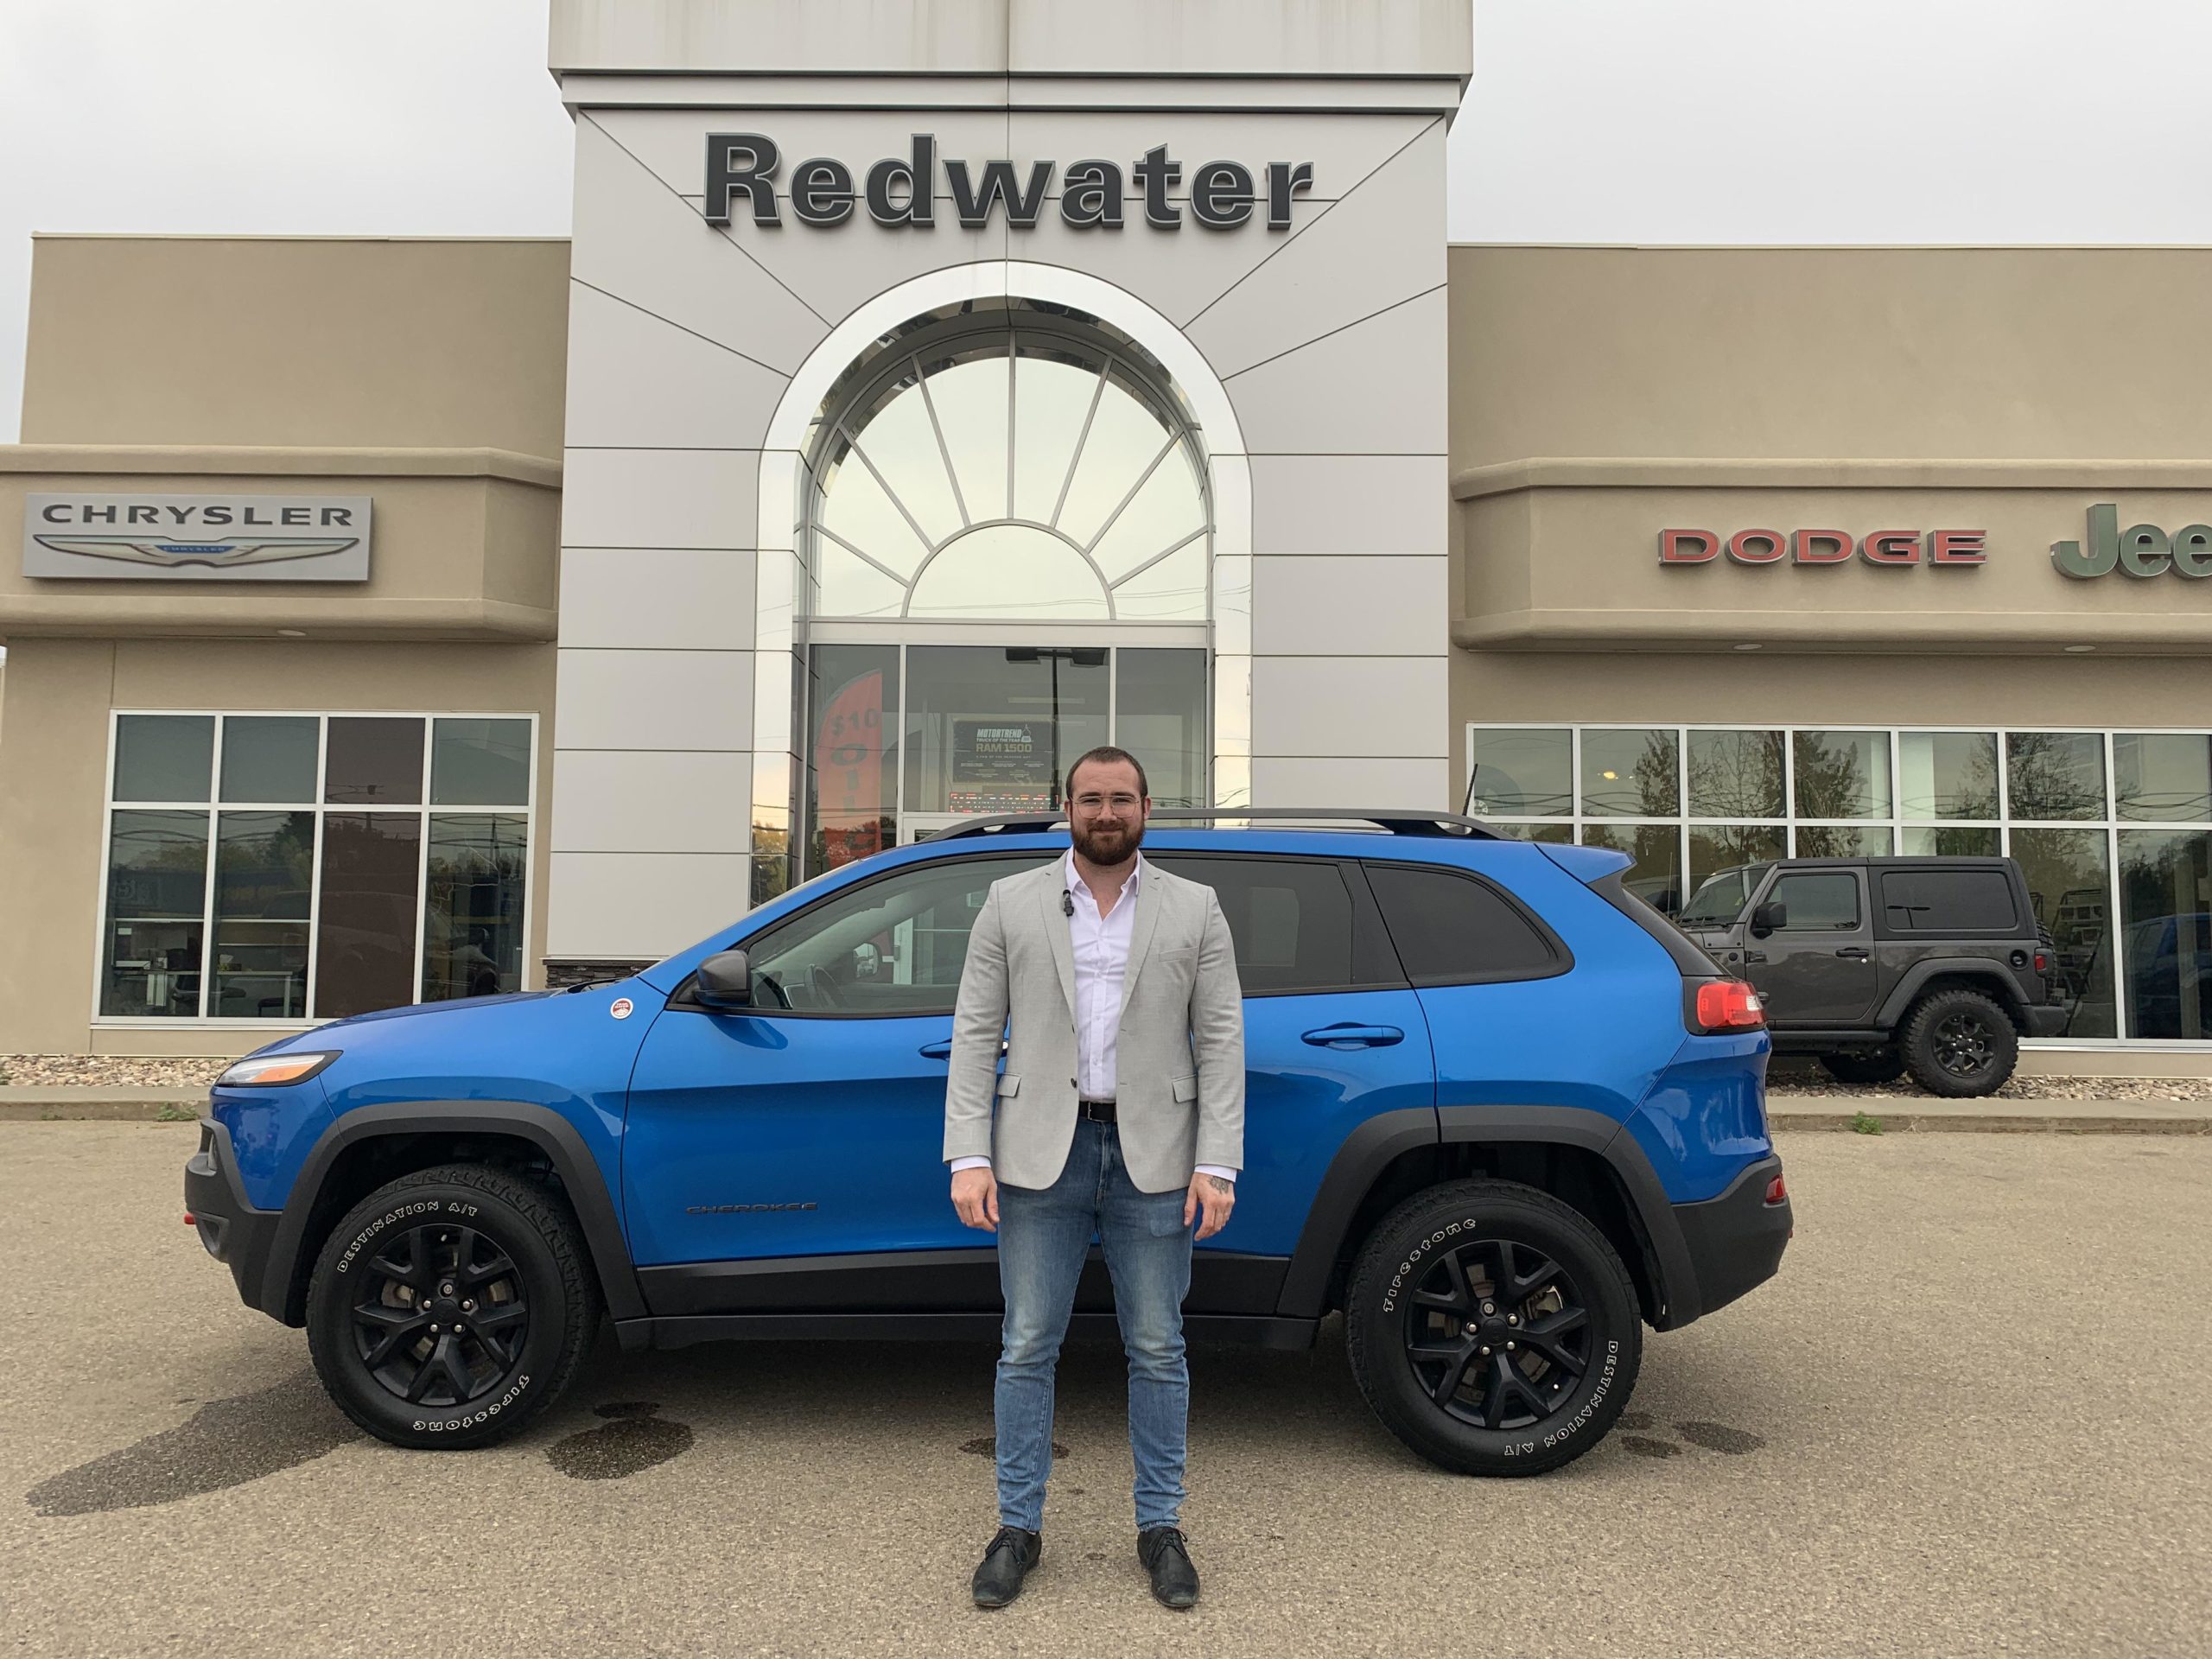 NCK6575A 2018 Jeep Cherokee Trailhawk Redwater Dodge